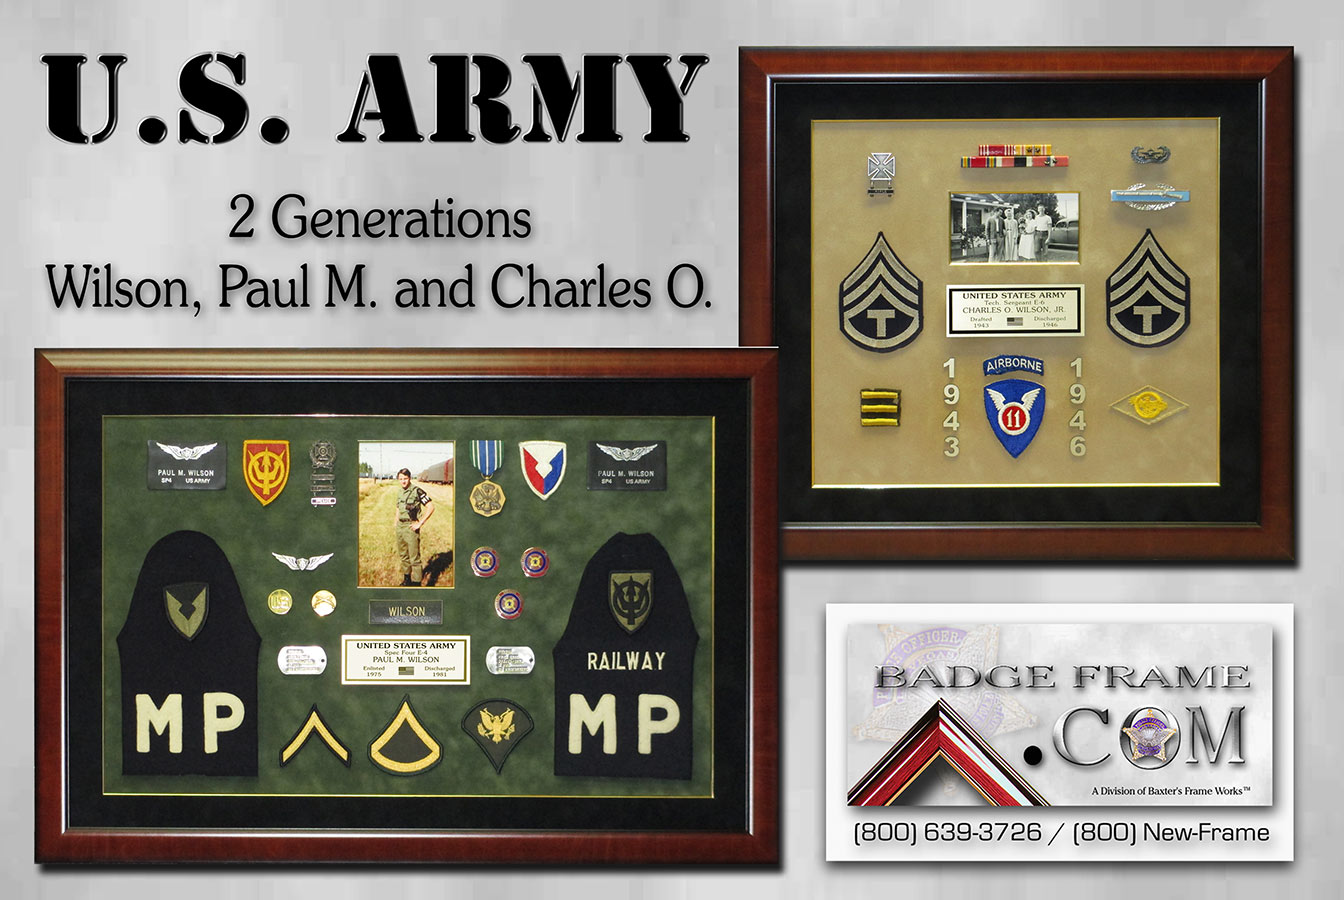 U.S. Army Shadowboxes from Badge
            Frame